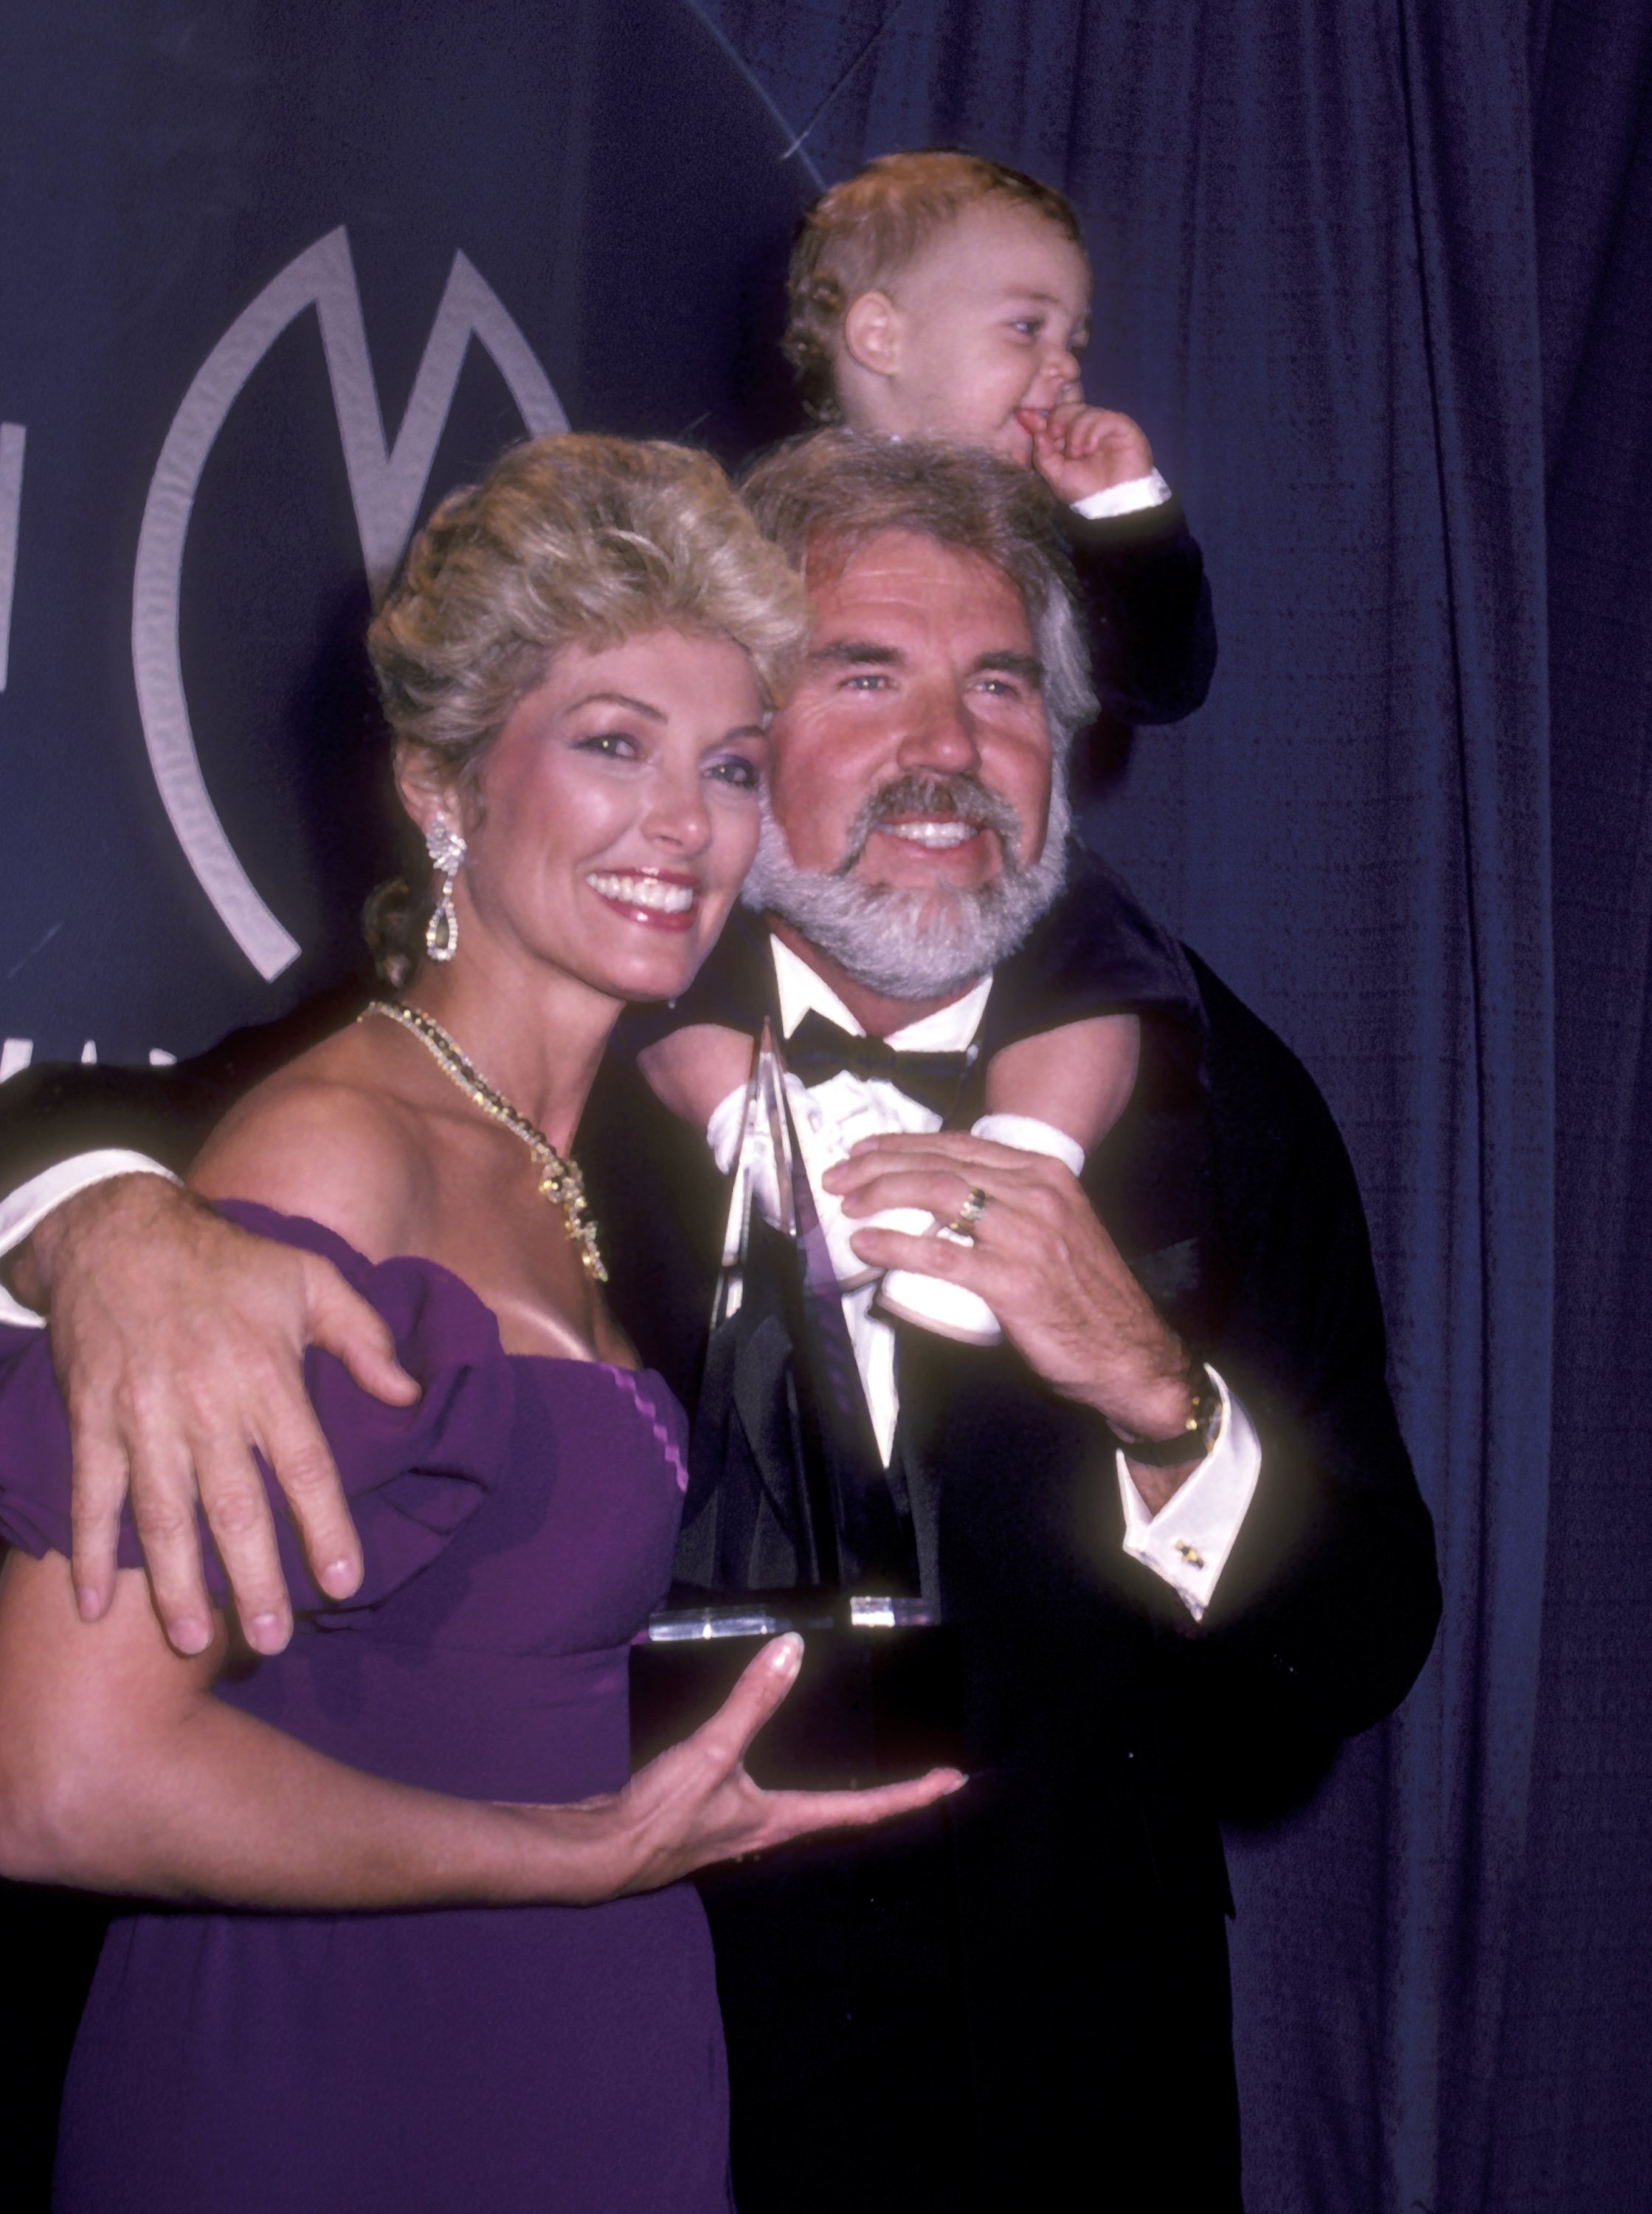 Musician Kenny Rogers, wife Marianne Gordon, and son Christopher Rogers attend the 10th Annual American Music Awards on January 17, 1983 at Shrine Auditorium in Los Angeles, California. | Photo: Getty Images